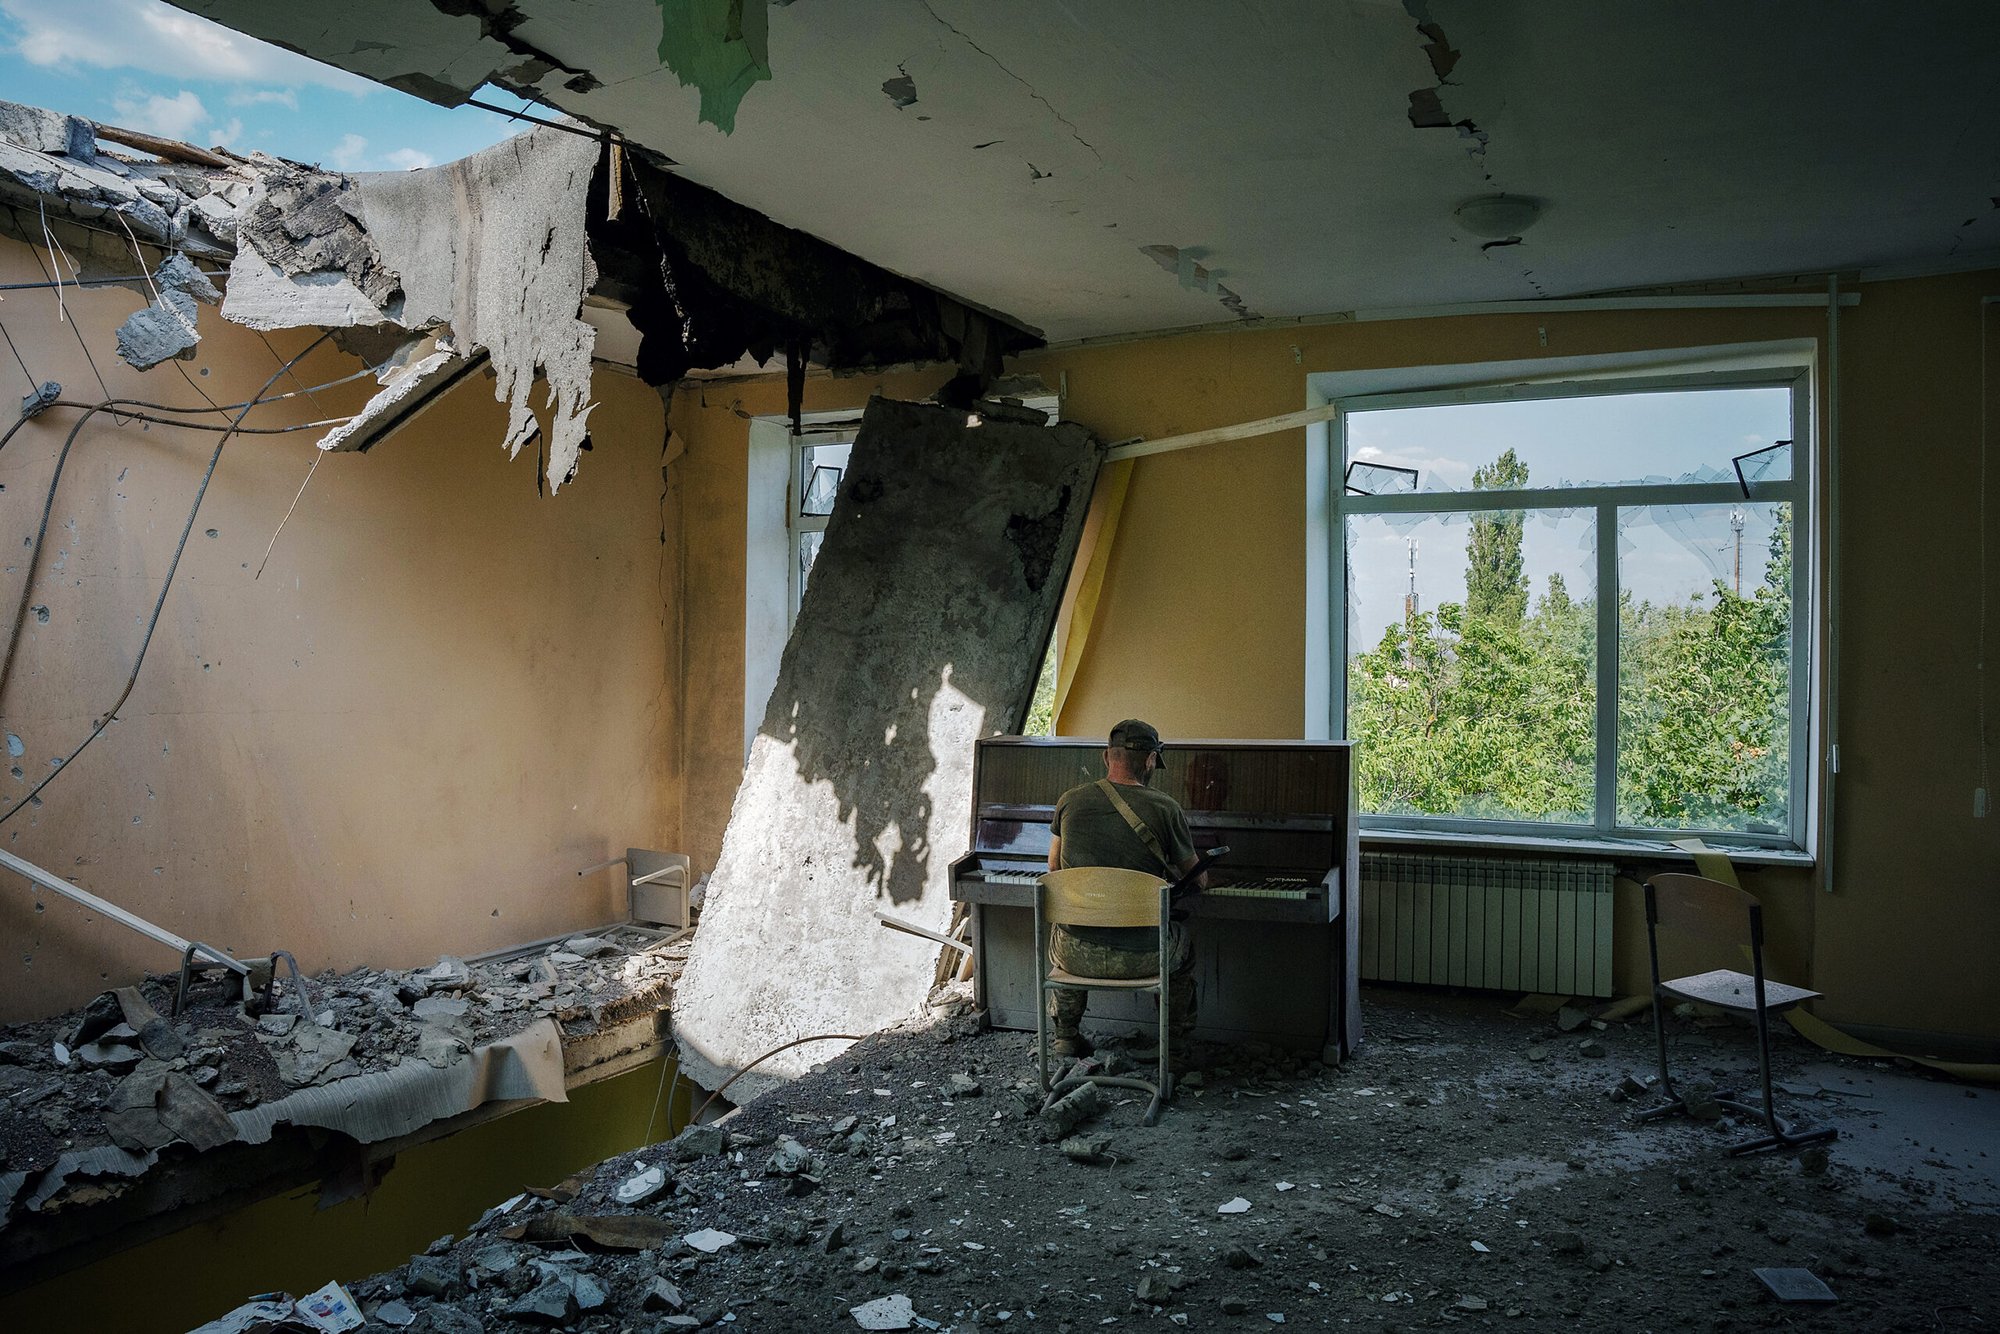 An Ukrainian soldier plays piano in a school destroyed by Russian bombing on the front line in Mykolaiv, Ukraine.